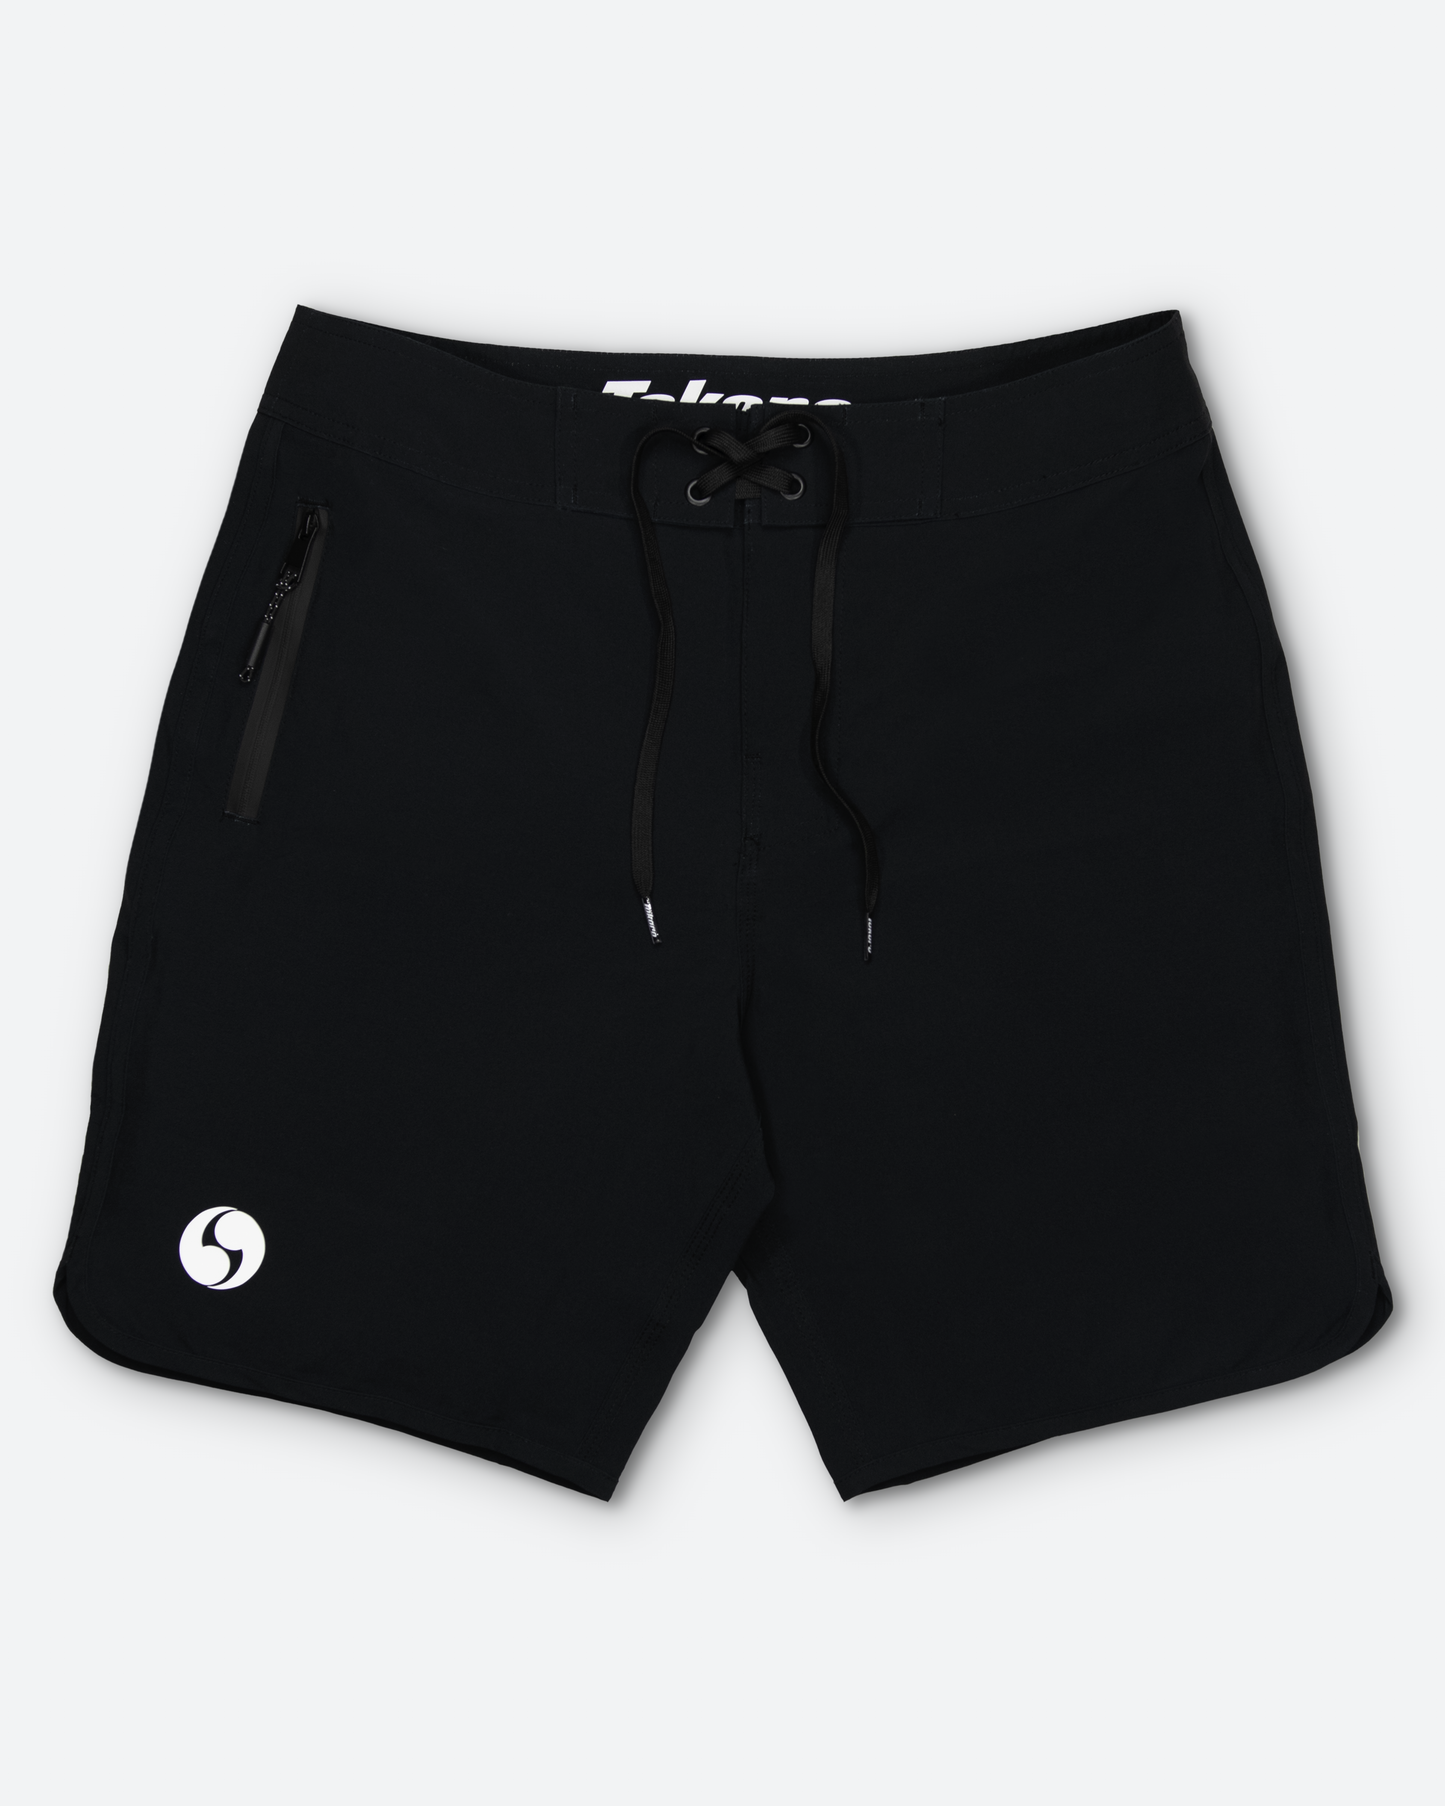 Priority Series High Performance Boardshorts - Solid Black 18"